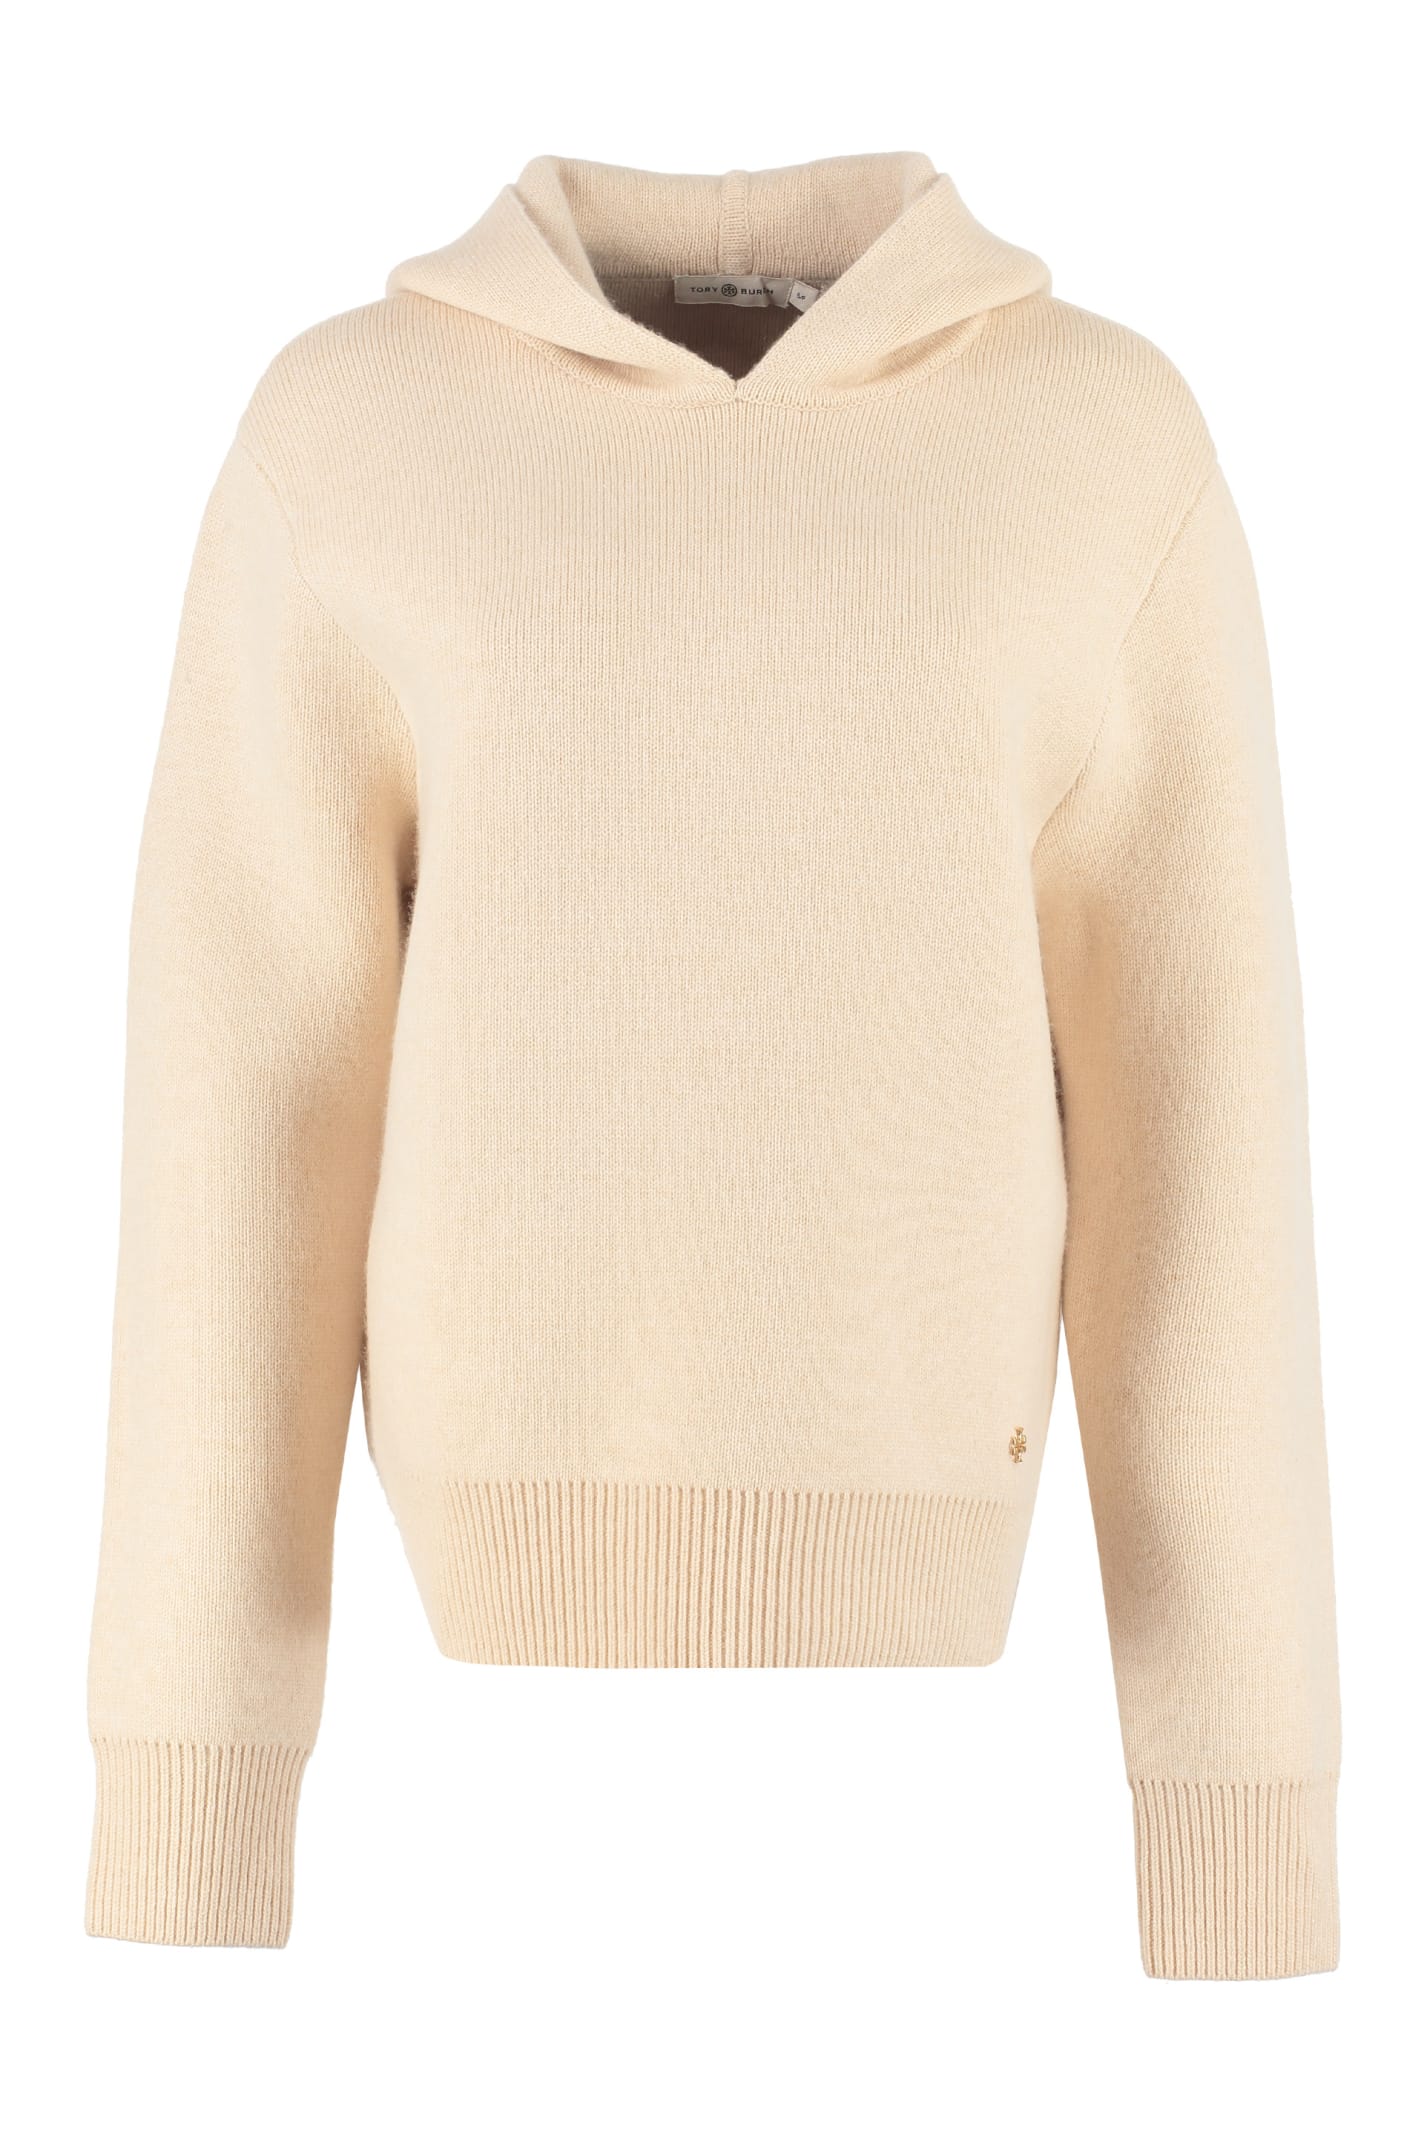 Tory Burch Wool And Cashmere Pullover